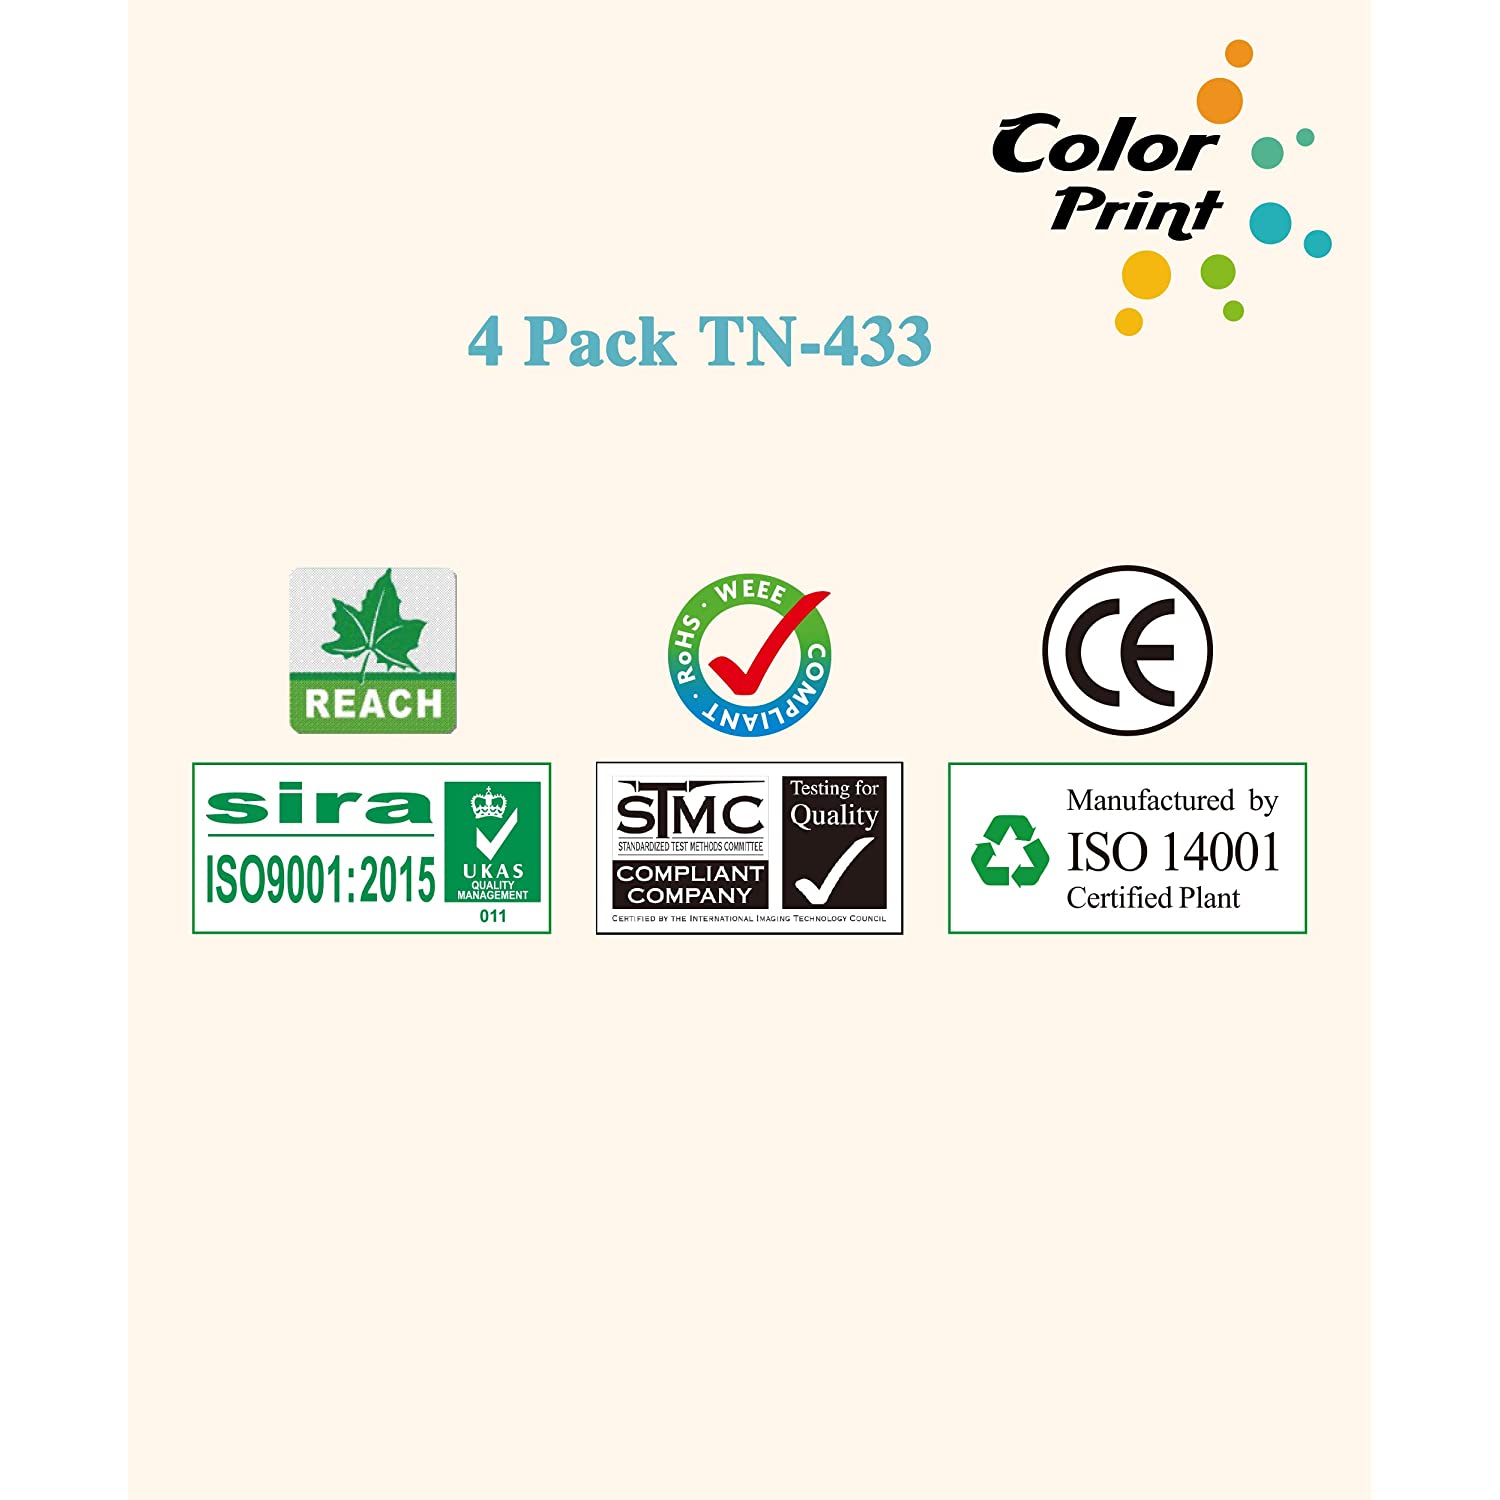 4-Pack Tn-433 Compatible Toner Cartridge Replacement For Brother Tn436 Tn433 Tn431 Tn-436 Used For Hl-8260Cdw Hl-L8260Cdn Hl-L8360Cdw Mfc-L8690Cdw Mfc-L8900Cdw ..